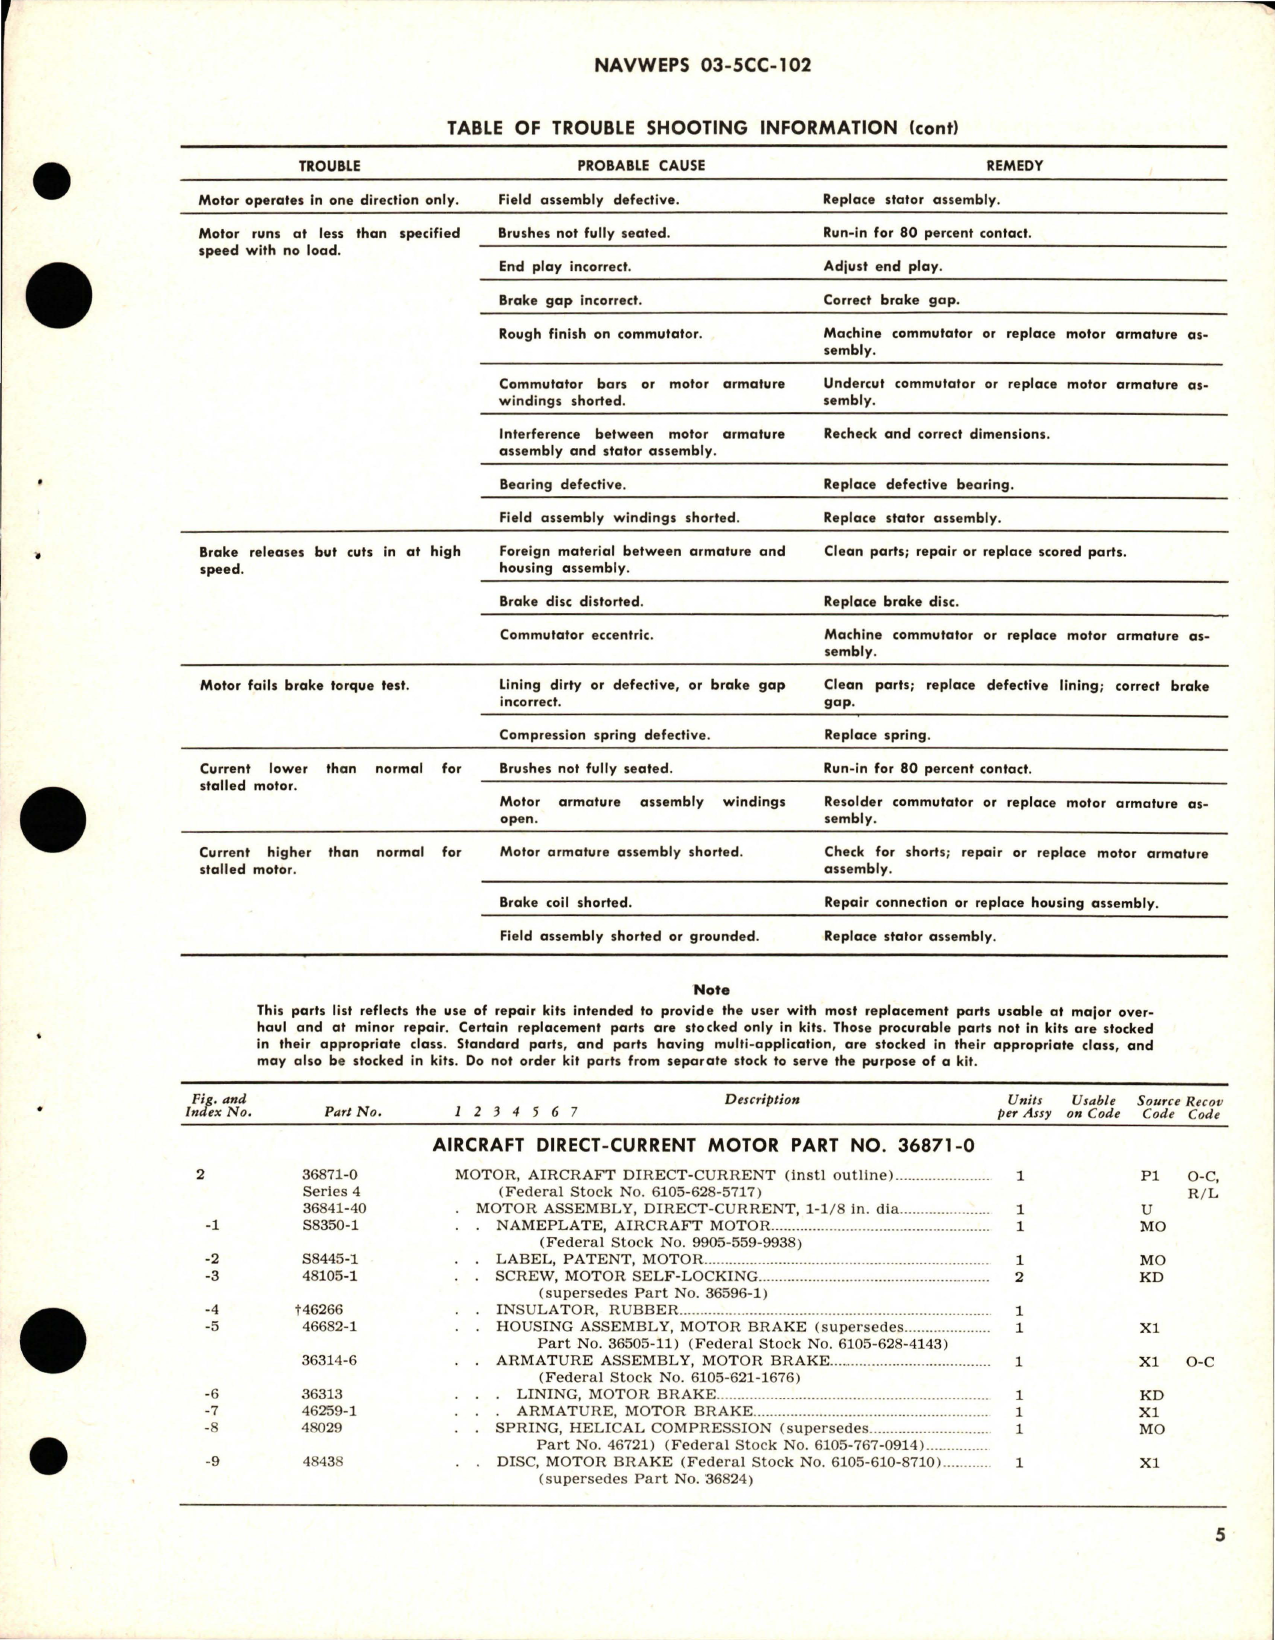 Sample page 5 from AirCorps Library document: Overhaul Instructions with Parts Breakdown for Direct-Current Motor - Part 36871-0 